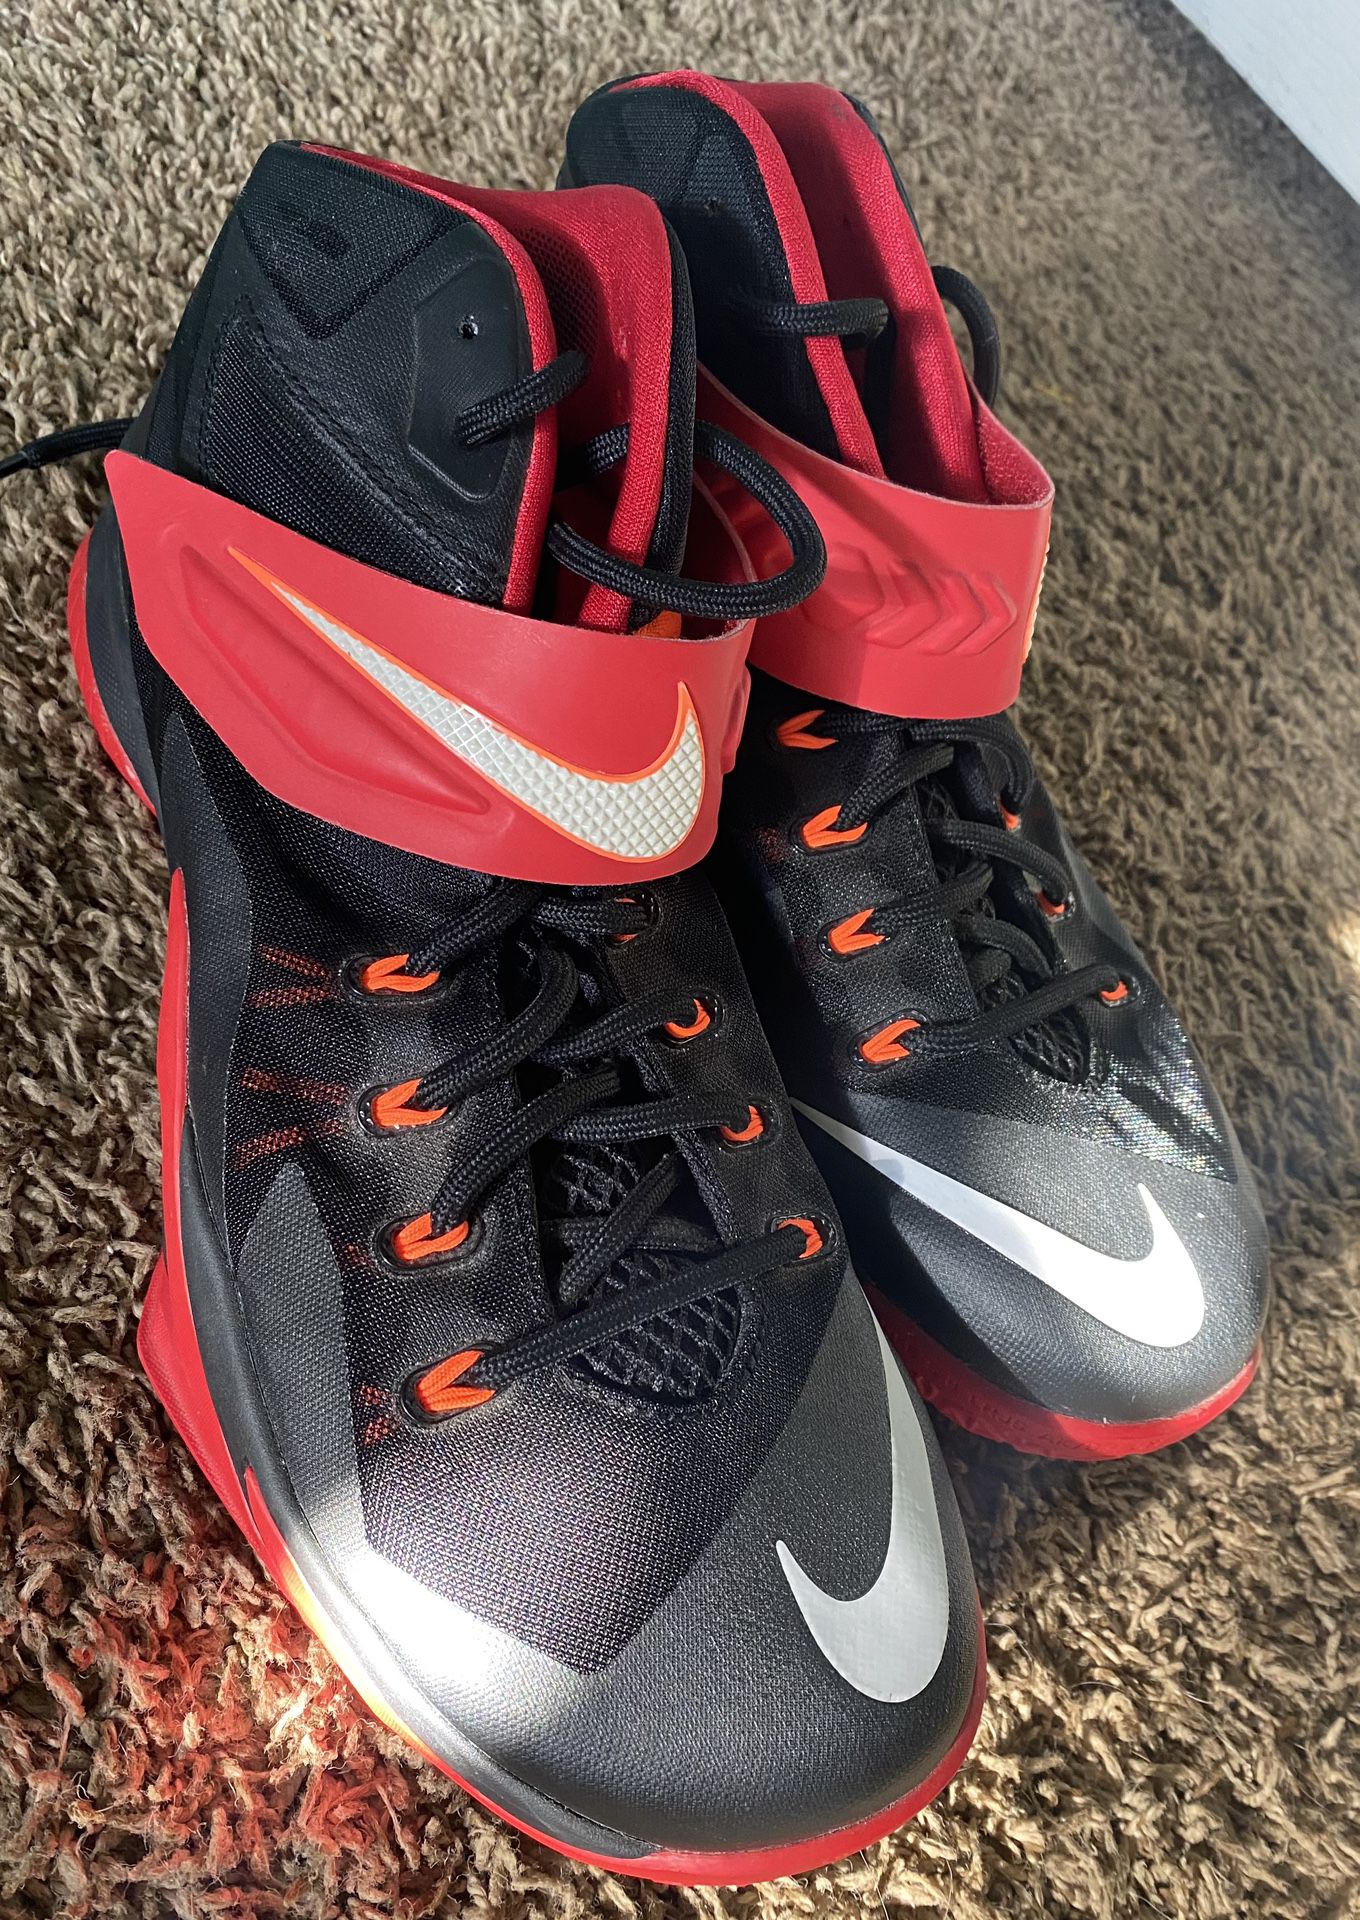 Zoom LeBron Soldier VIII 8 Black/Red Shoes. 11 for Sale in San Antonio, TX - OfferUp